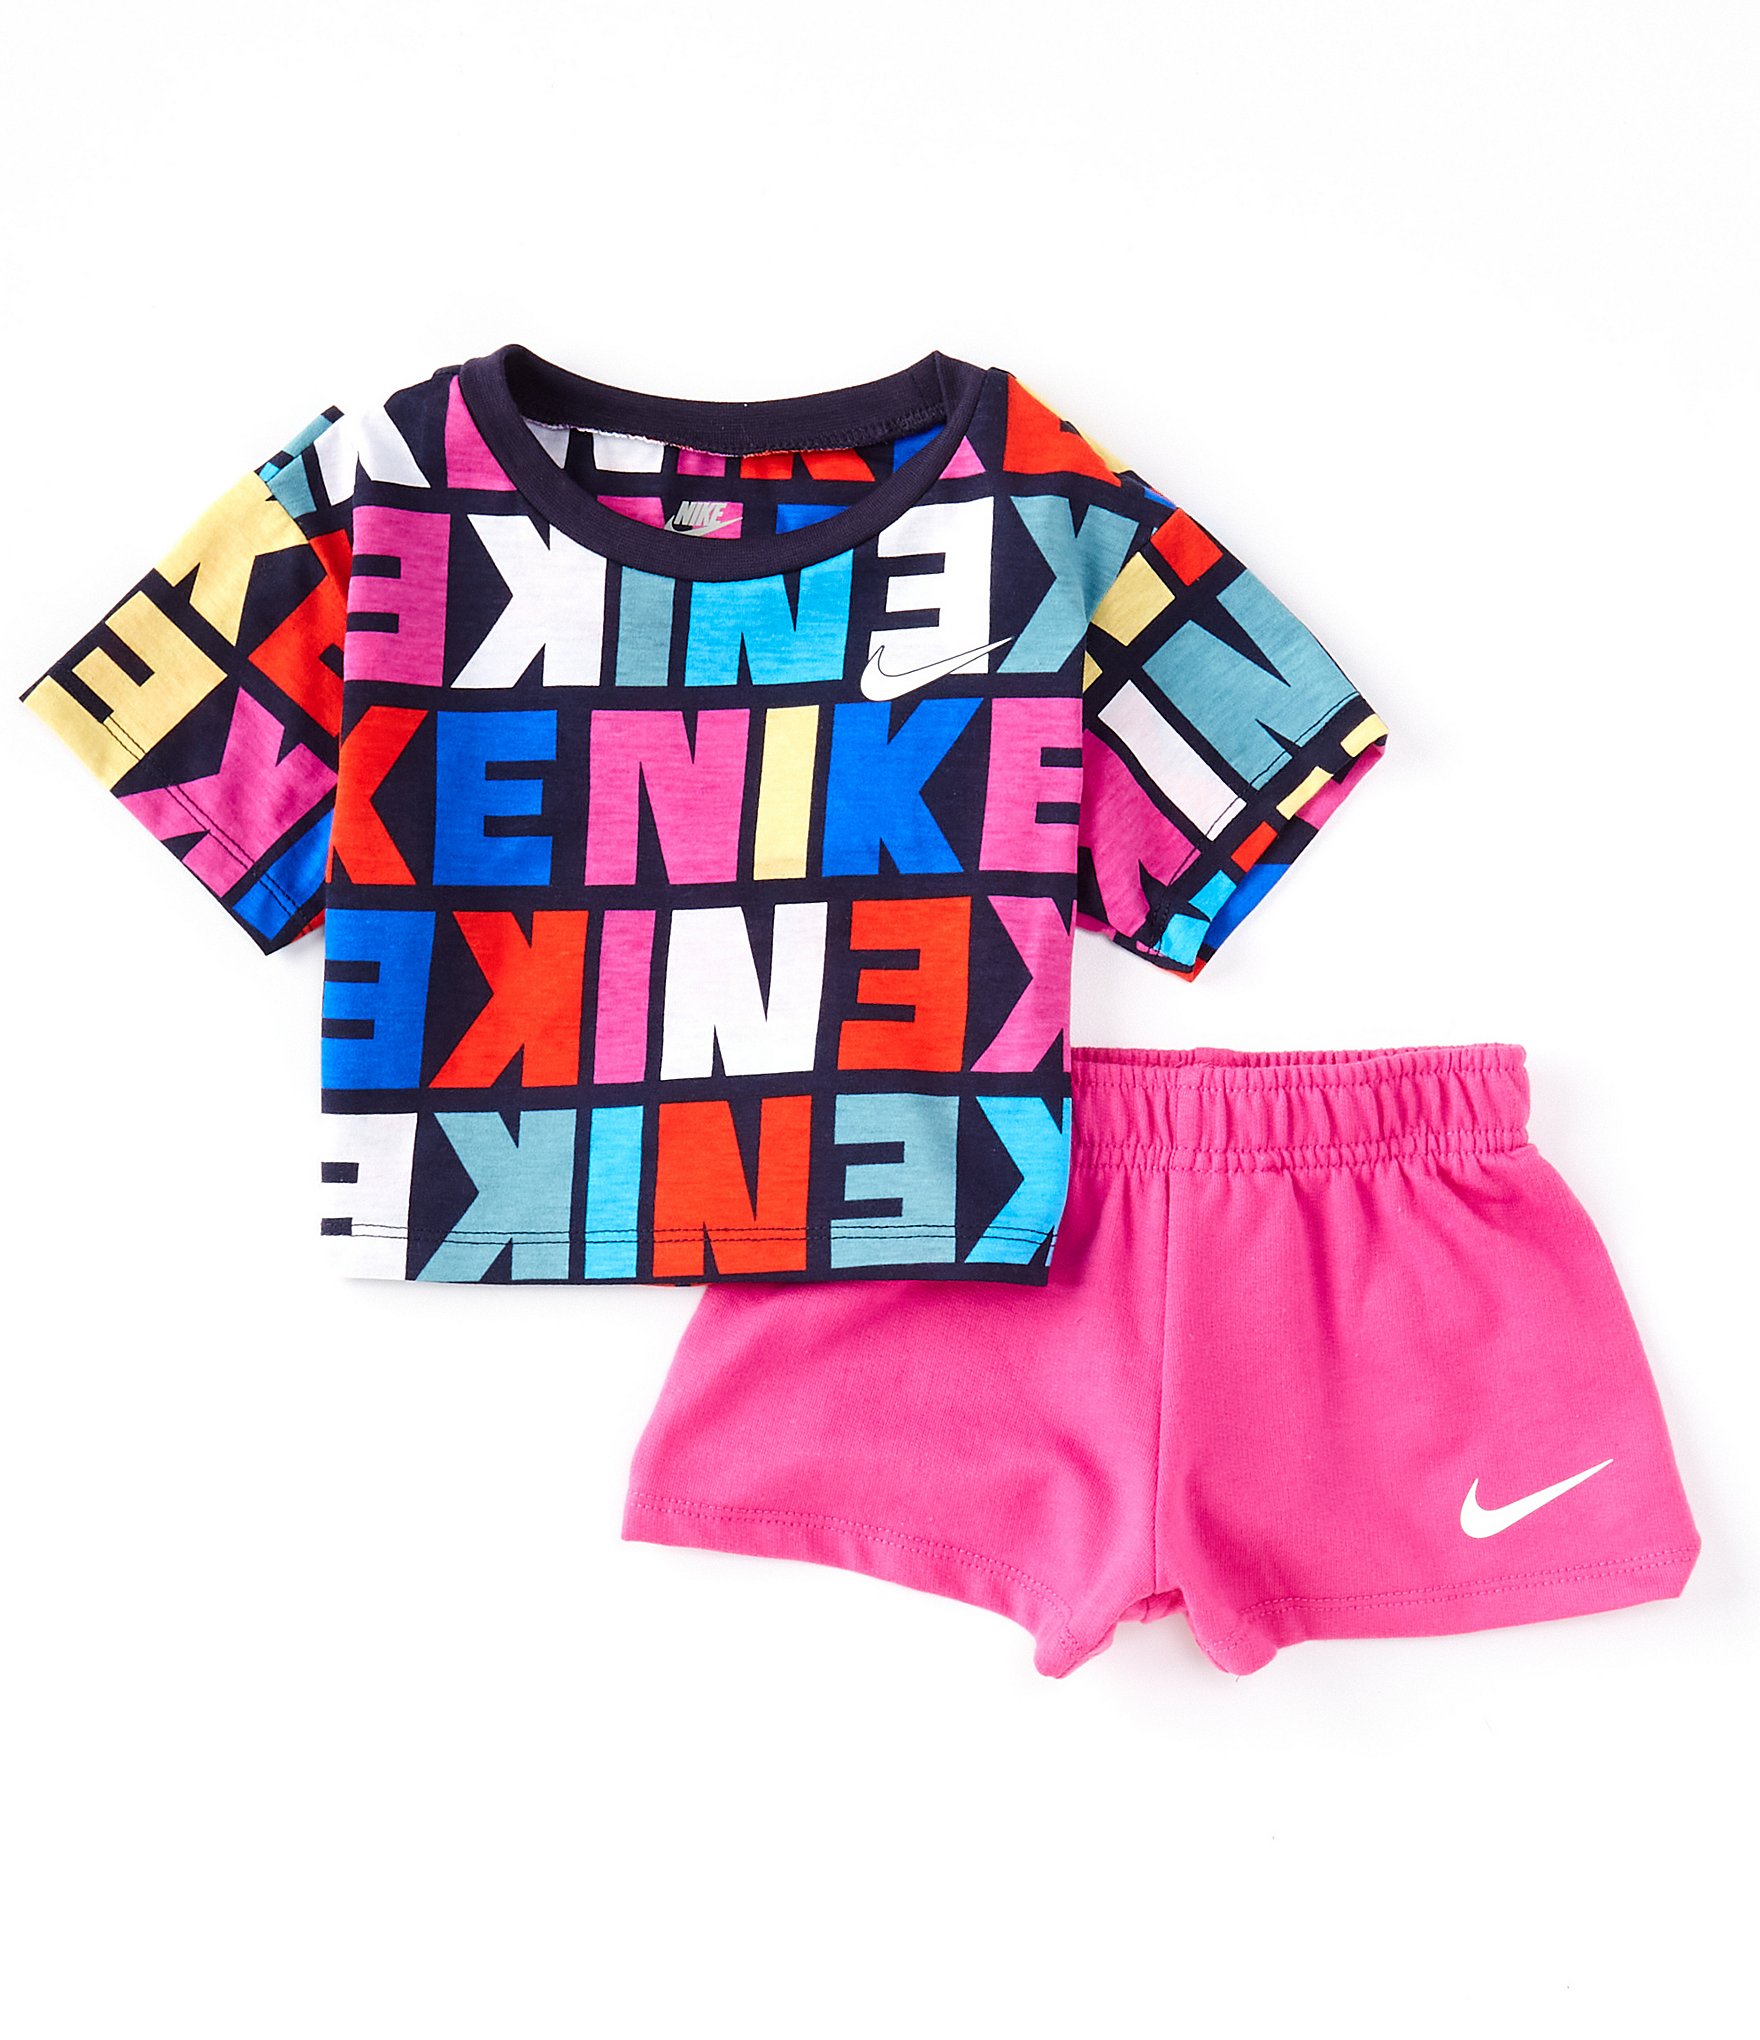 Women's Nike Panties and underwear from $24